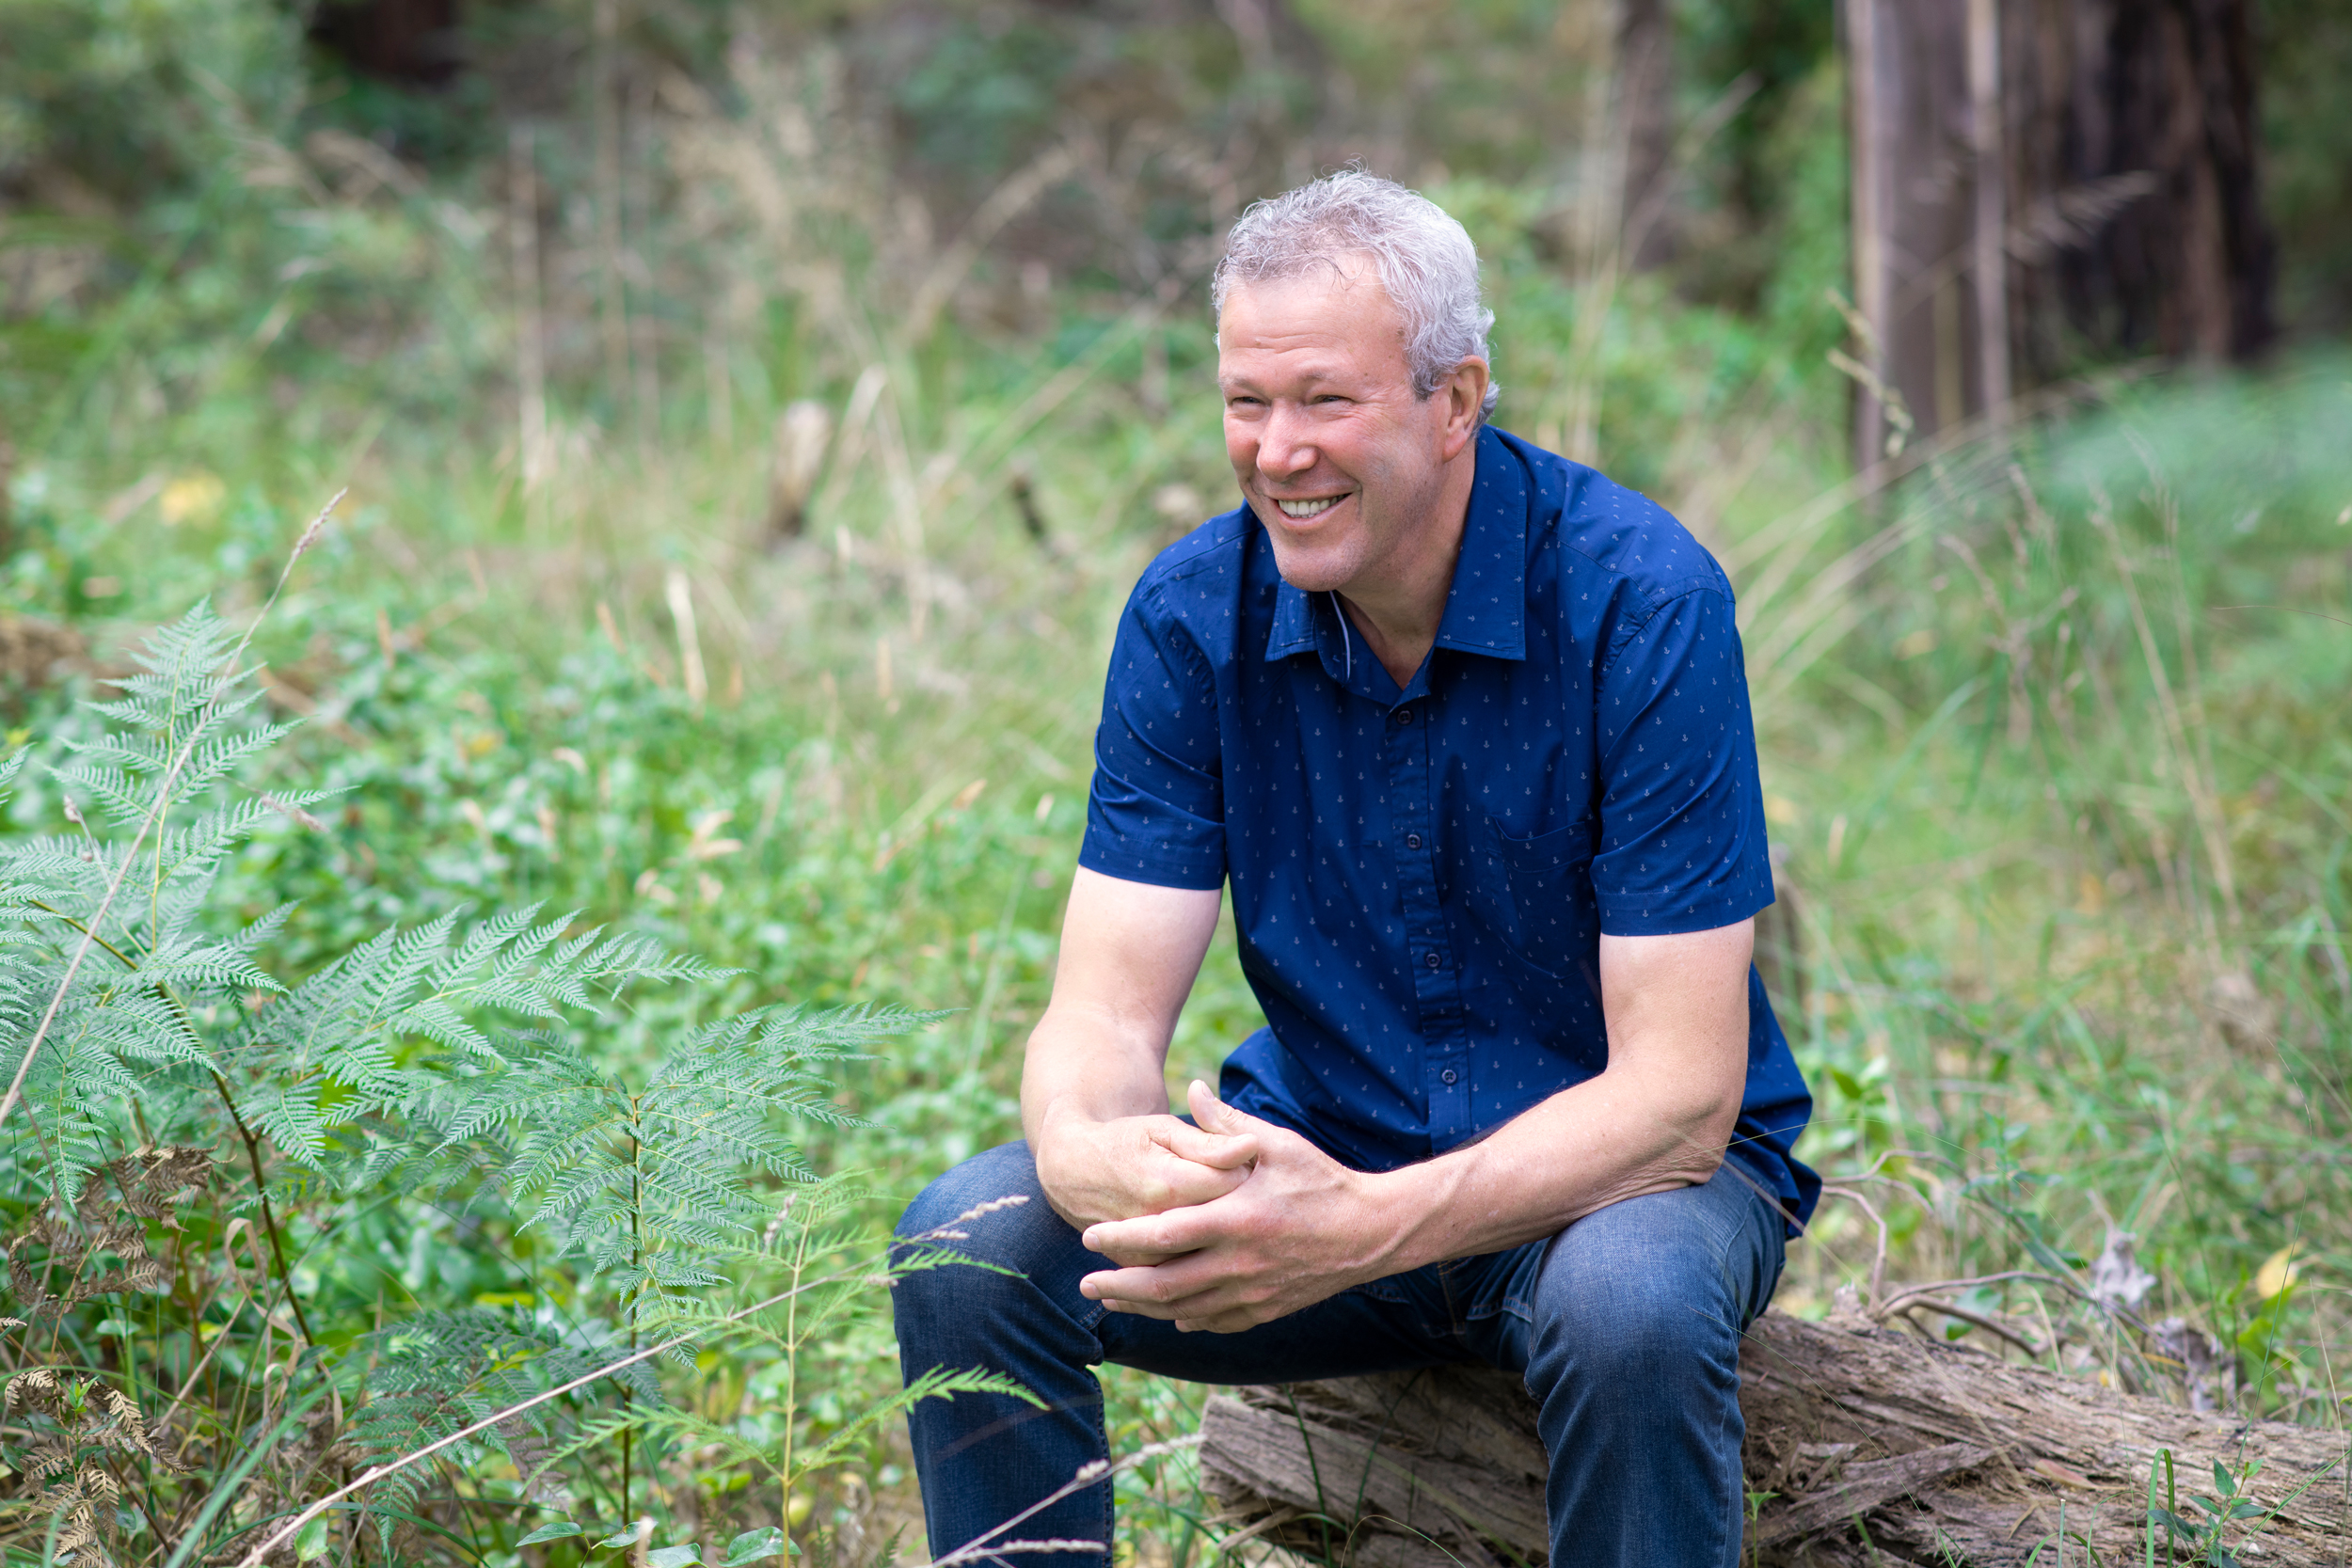 A man sits on a log for a relaxed and natural headshot for a personal branding session in Melbourne. He wears a blue shirt and jeans, and is looking away from the camera with a smile.